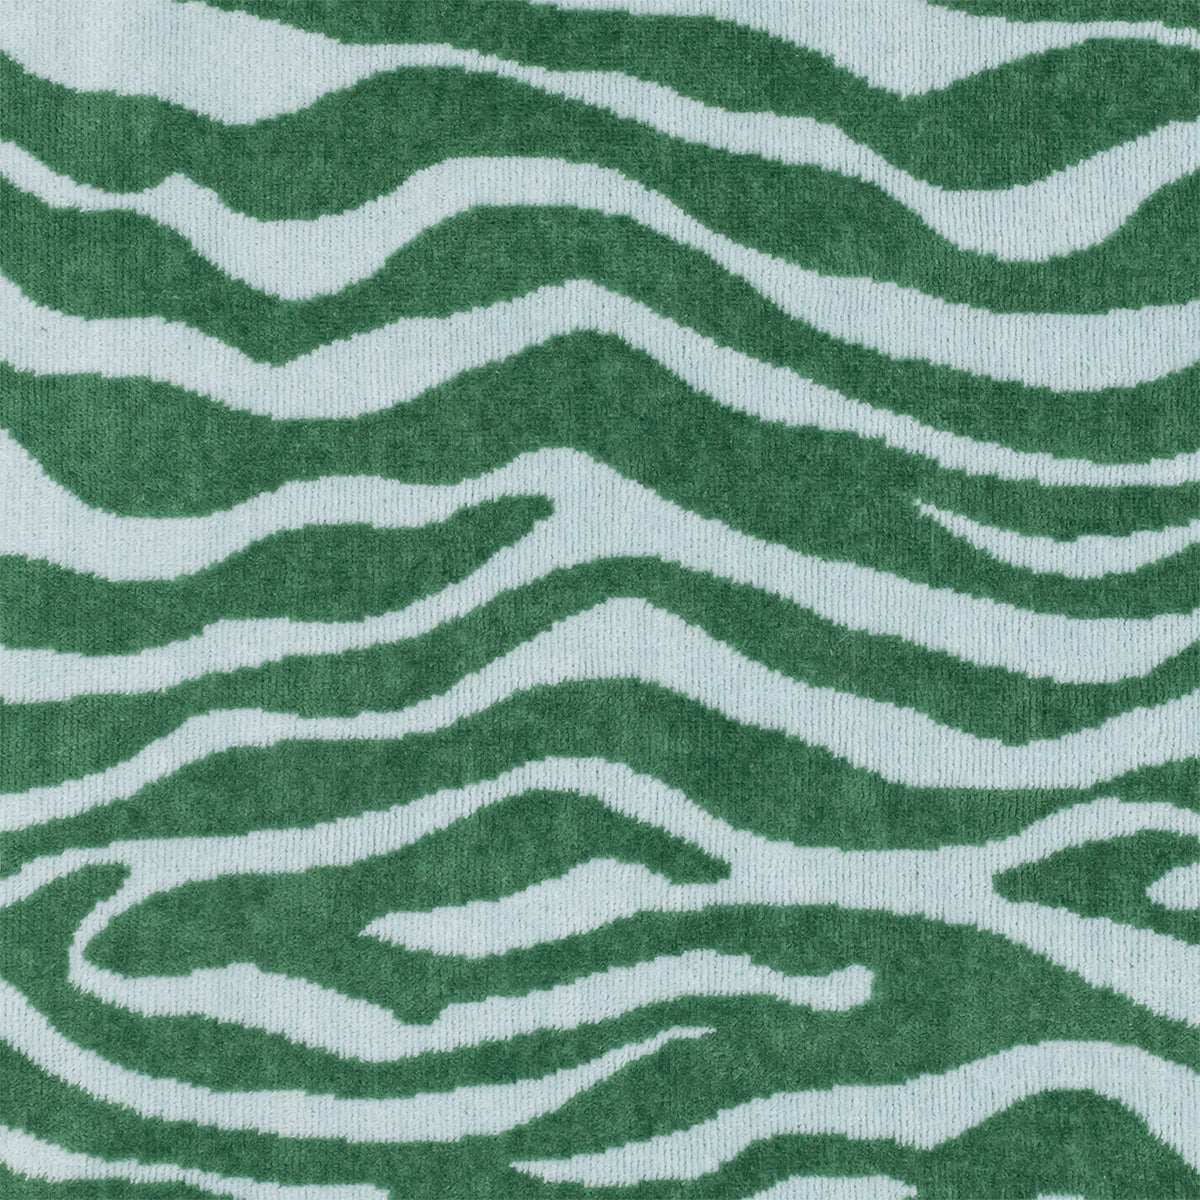 Swatch Sample of Matouk Santiago Beach Towels in Color Palm